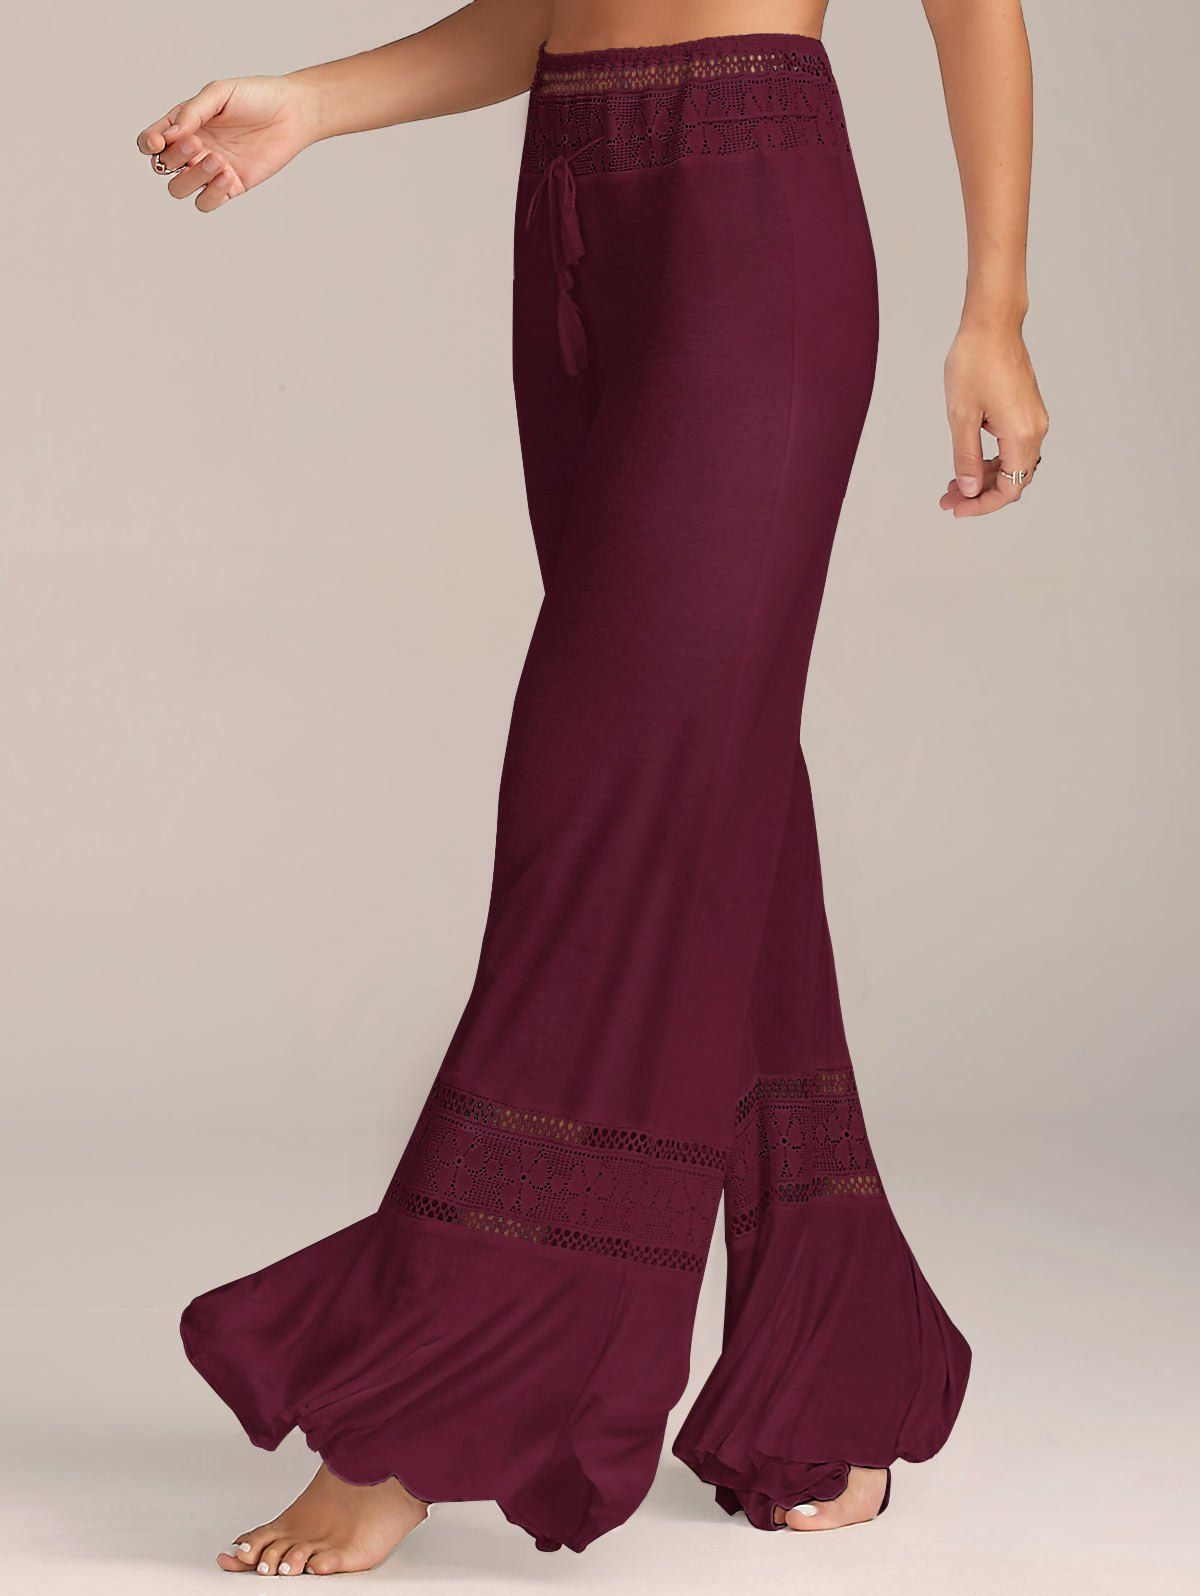 [41 Off] 2021 High Waisted Lace Panel Palazzo Pants In Wine Red Dresslily